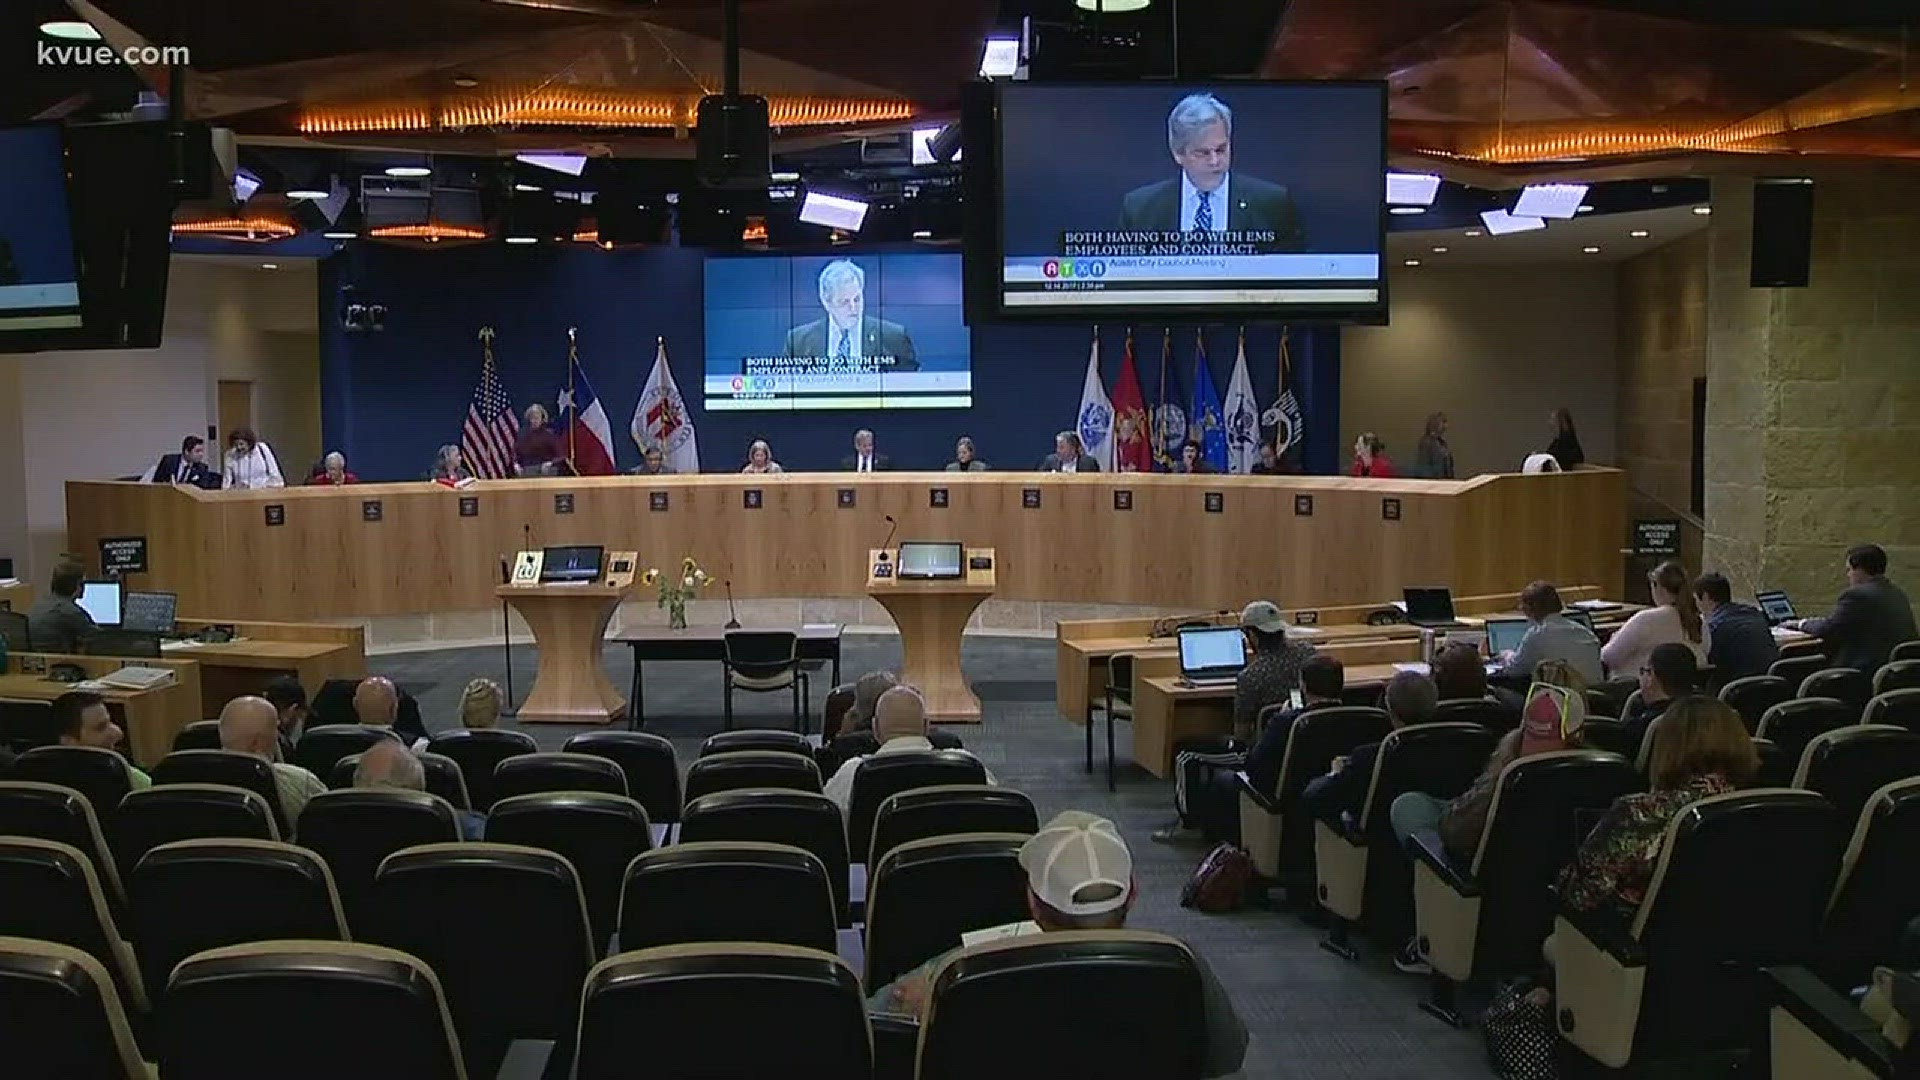 The Austin City Council is holding its last regular meeting of the year, and members are tackling an agenda with more than 100 items.